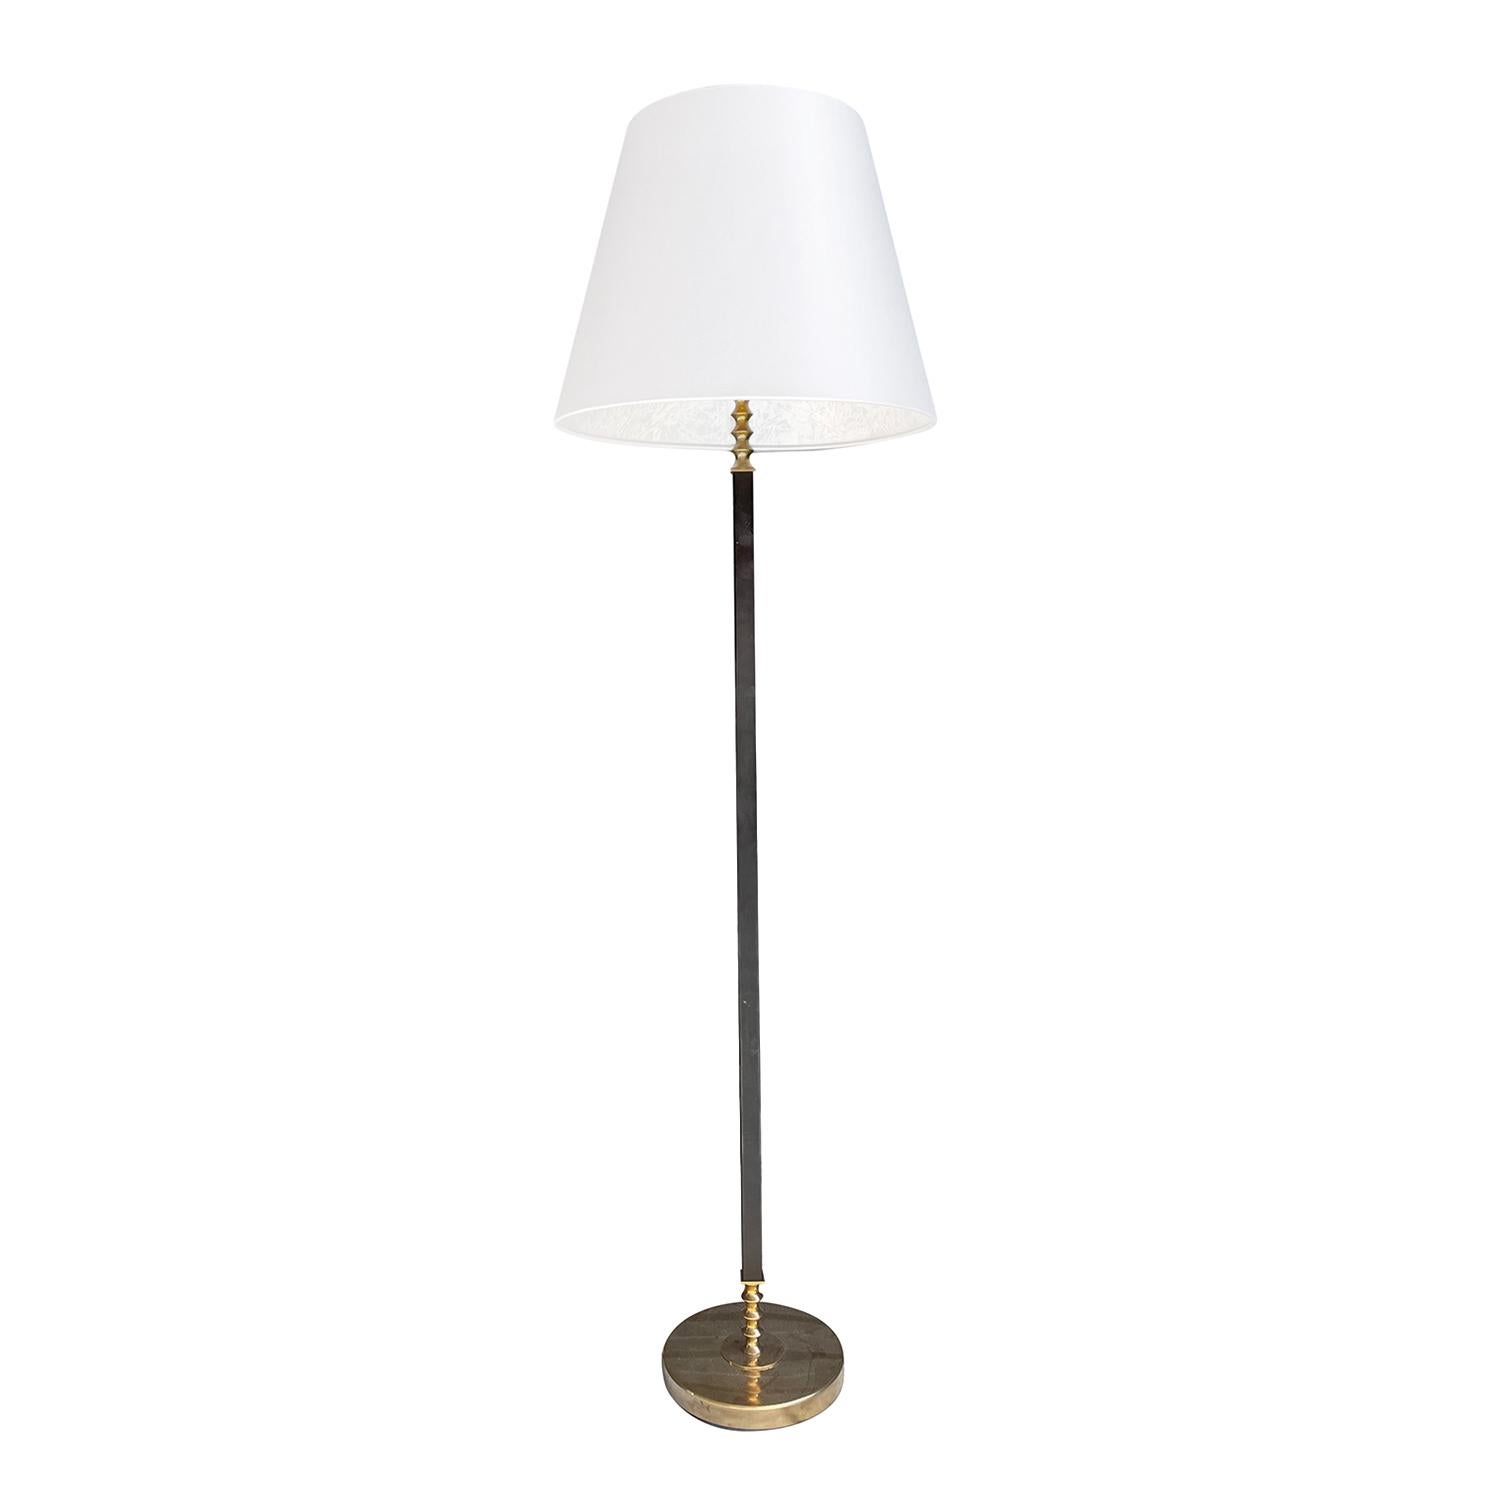 A black, vintage Mid-Century Modern Swedish floor lamp with a new white round shade made of hand crafted lacquered metal, produced by Böhlmarks in good condition. The steam of the Scandinavian light is enhanced by detailed brass rings, featuring a